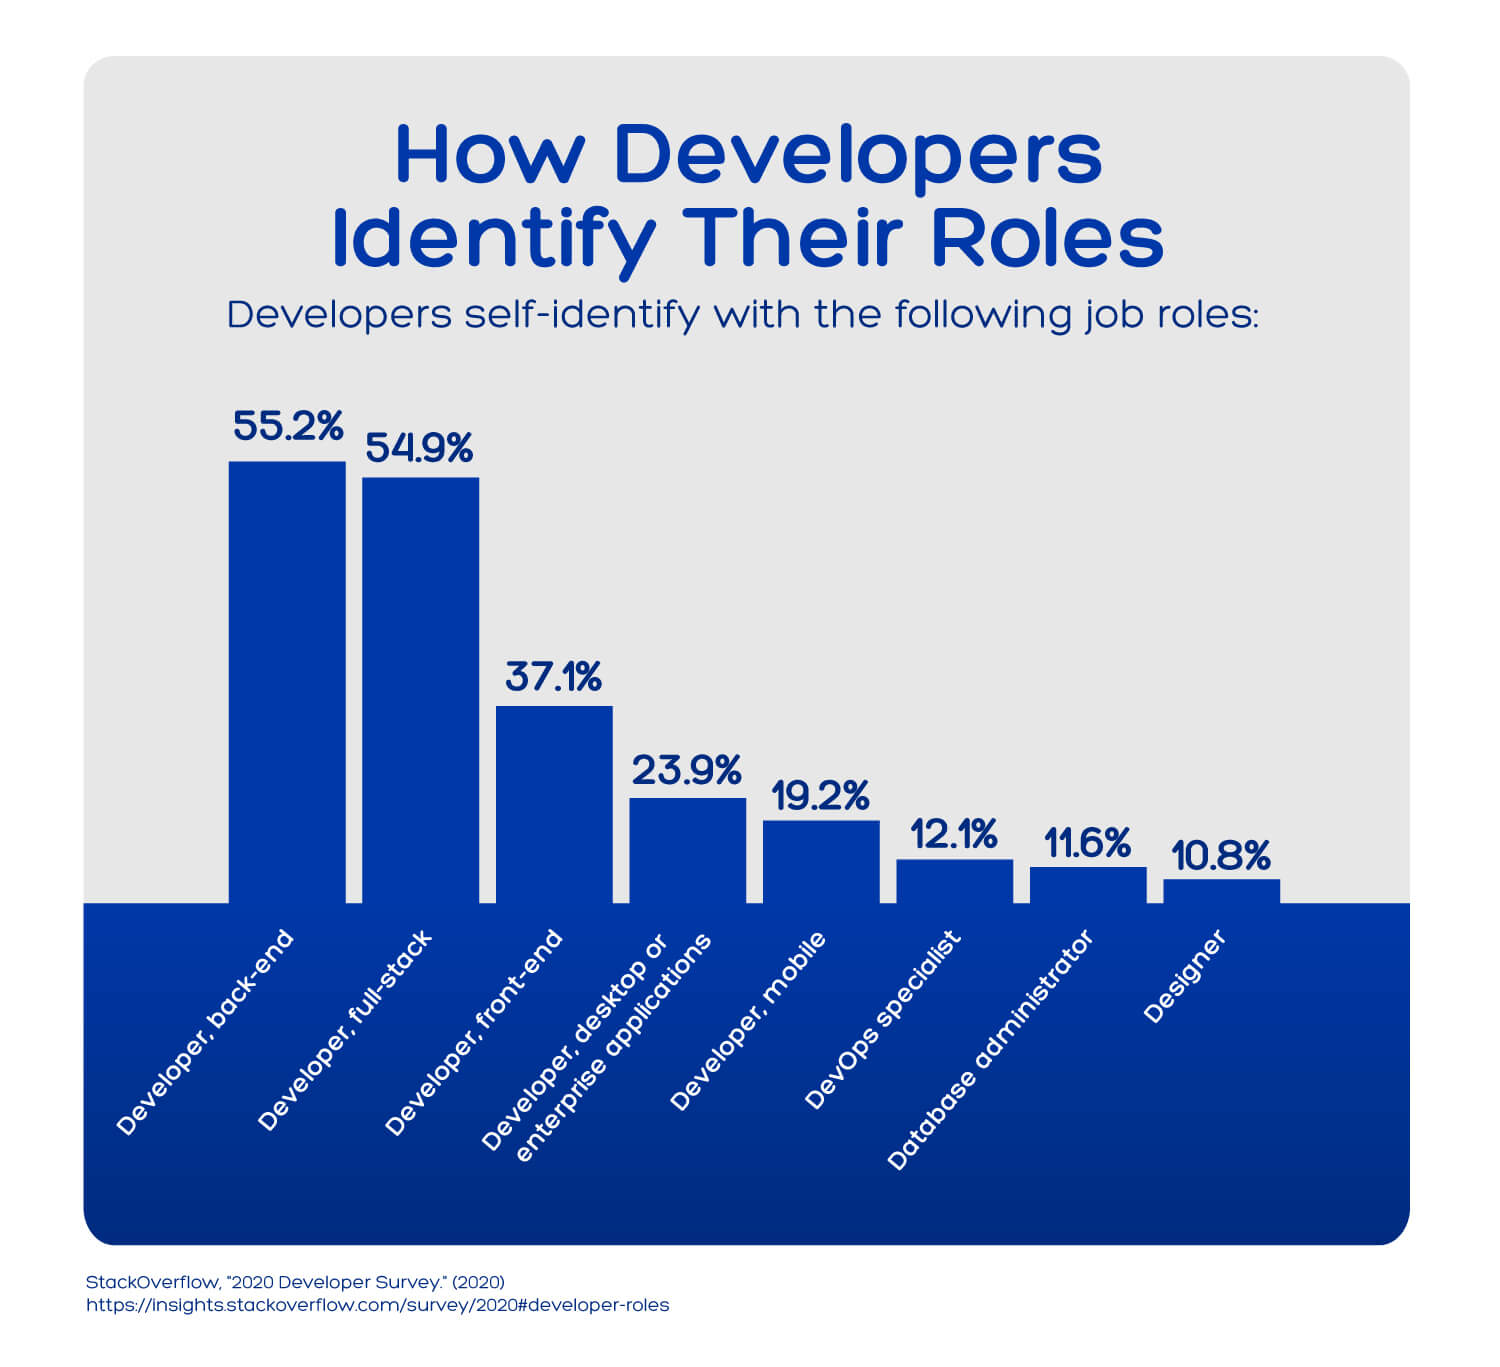 Chart showing the percentage of developers who identify as full stack developers